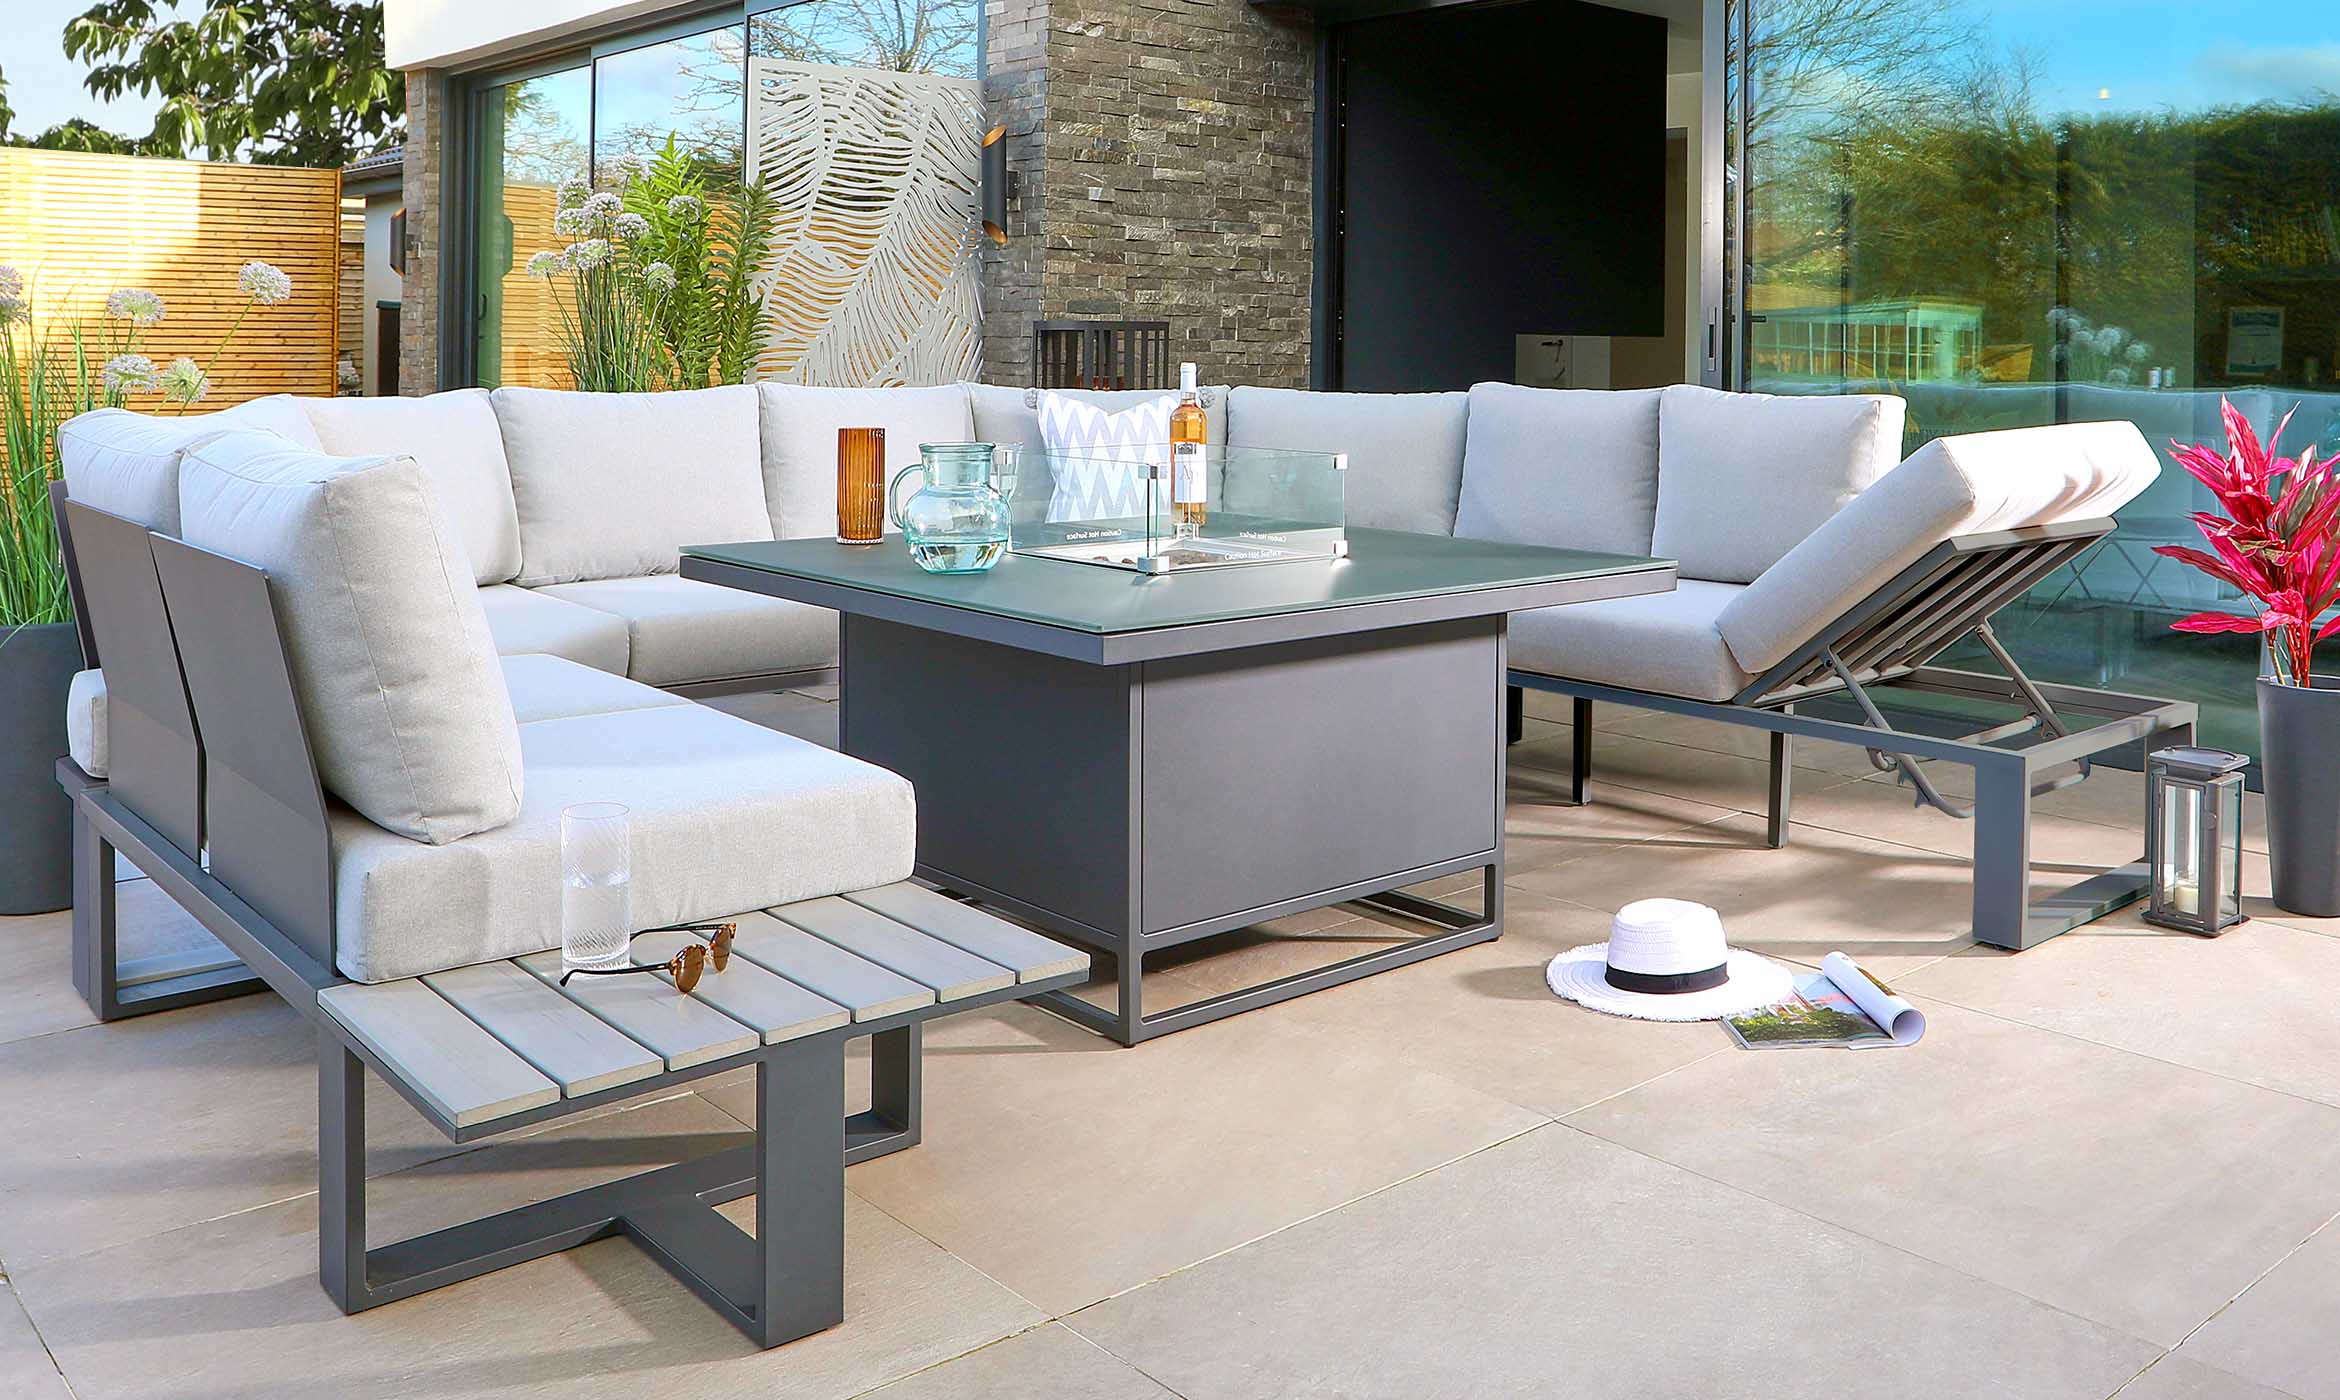 Danetti Outdoor: Get to Know our NEW Range of Modern Garden Furniture